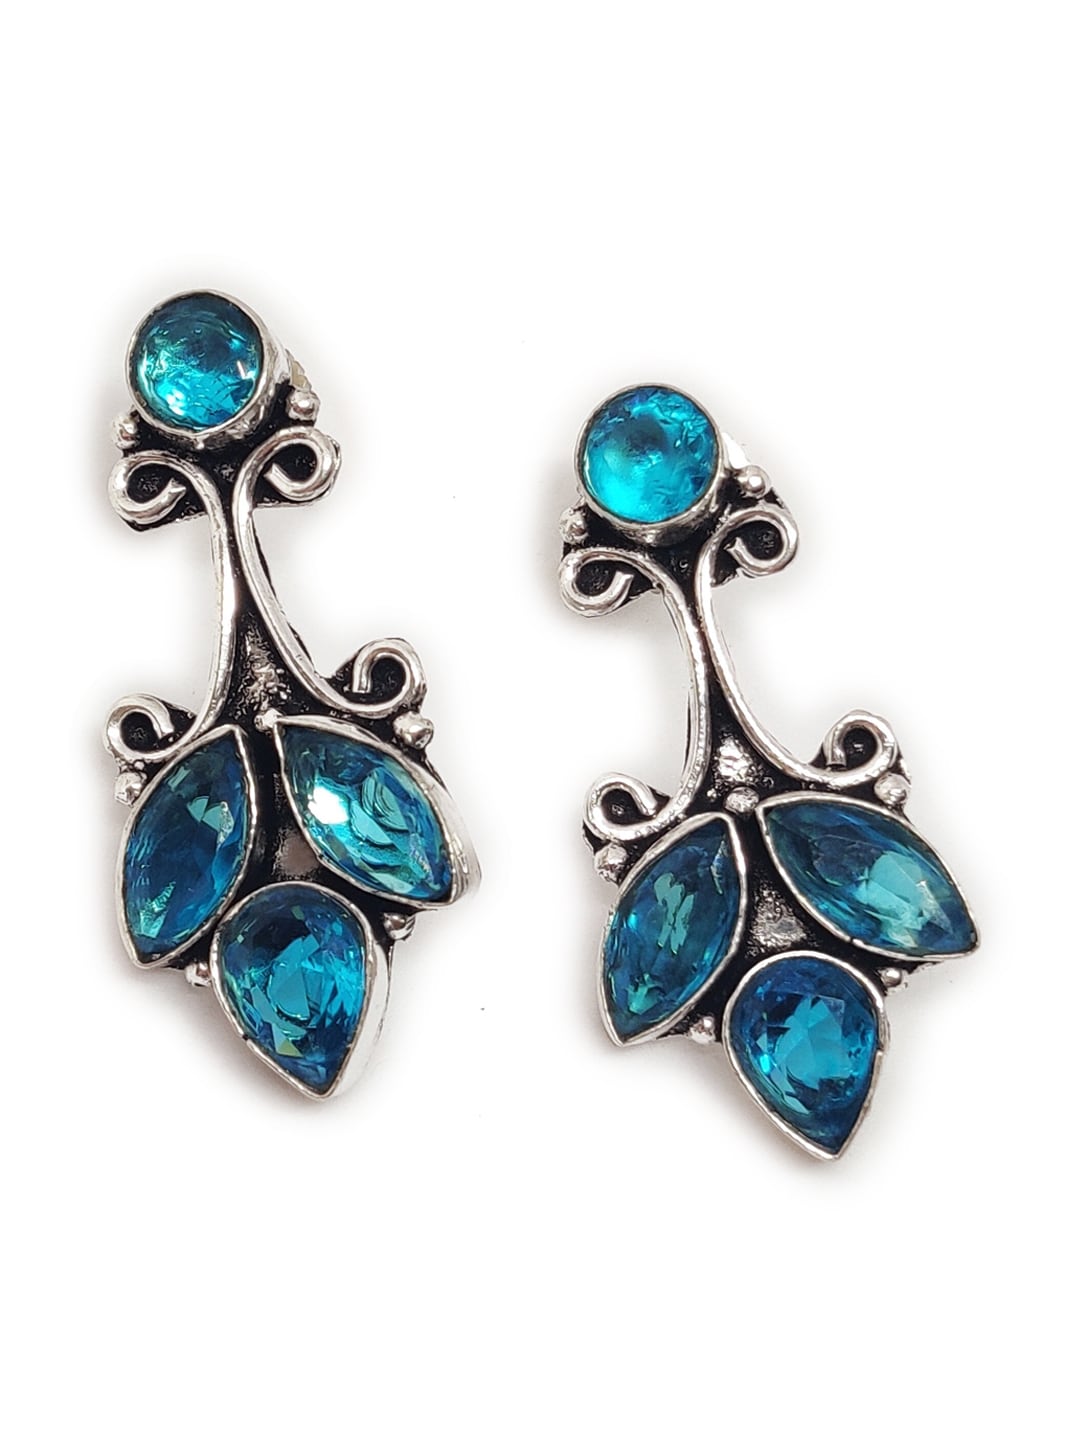 EL REGALO Blue Floral Studs Earrings - for Women and Girls
Style ID: 16851566